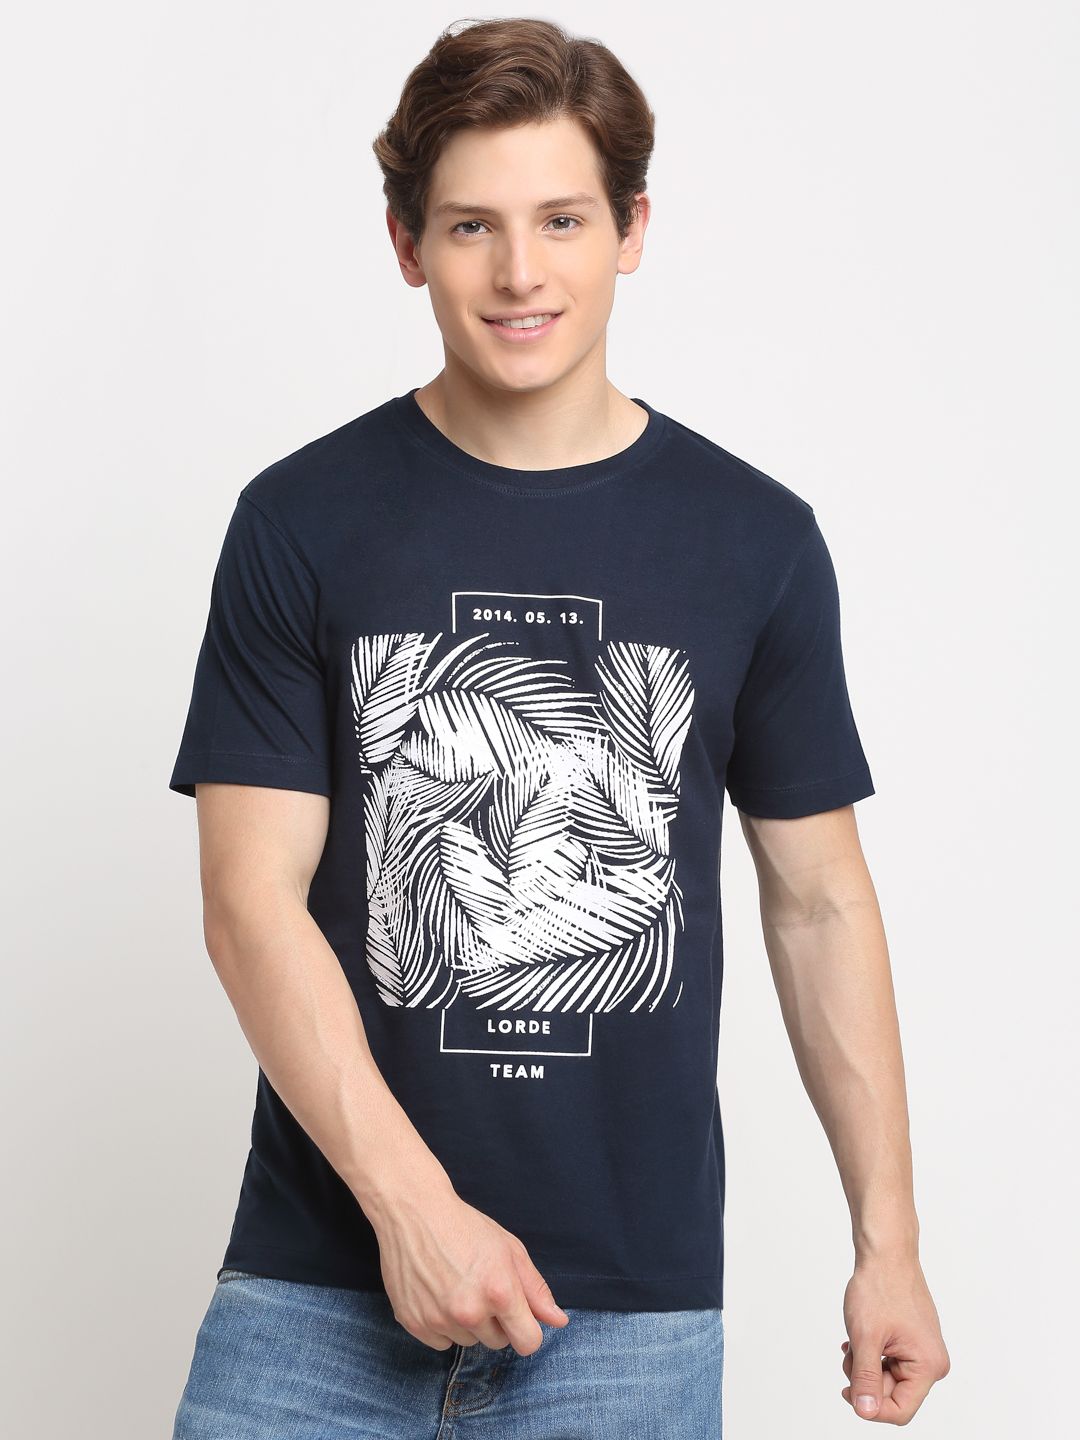 Printed Pattern, Men Combed Cotton Navy Blue T-Shirt